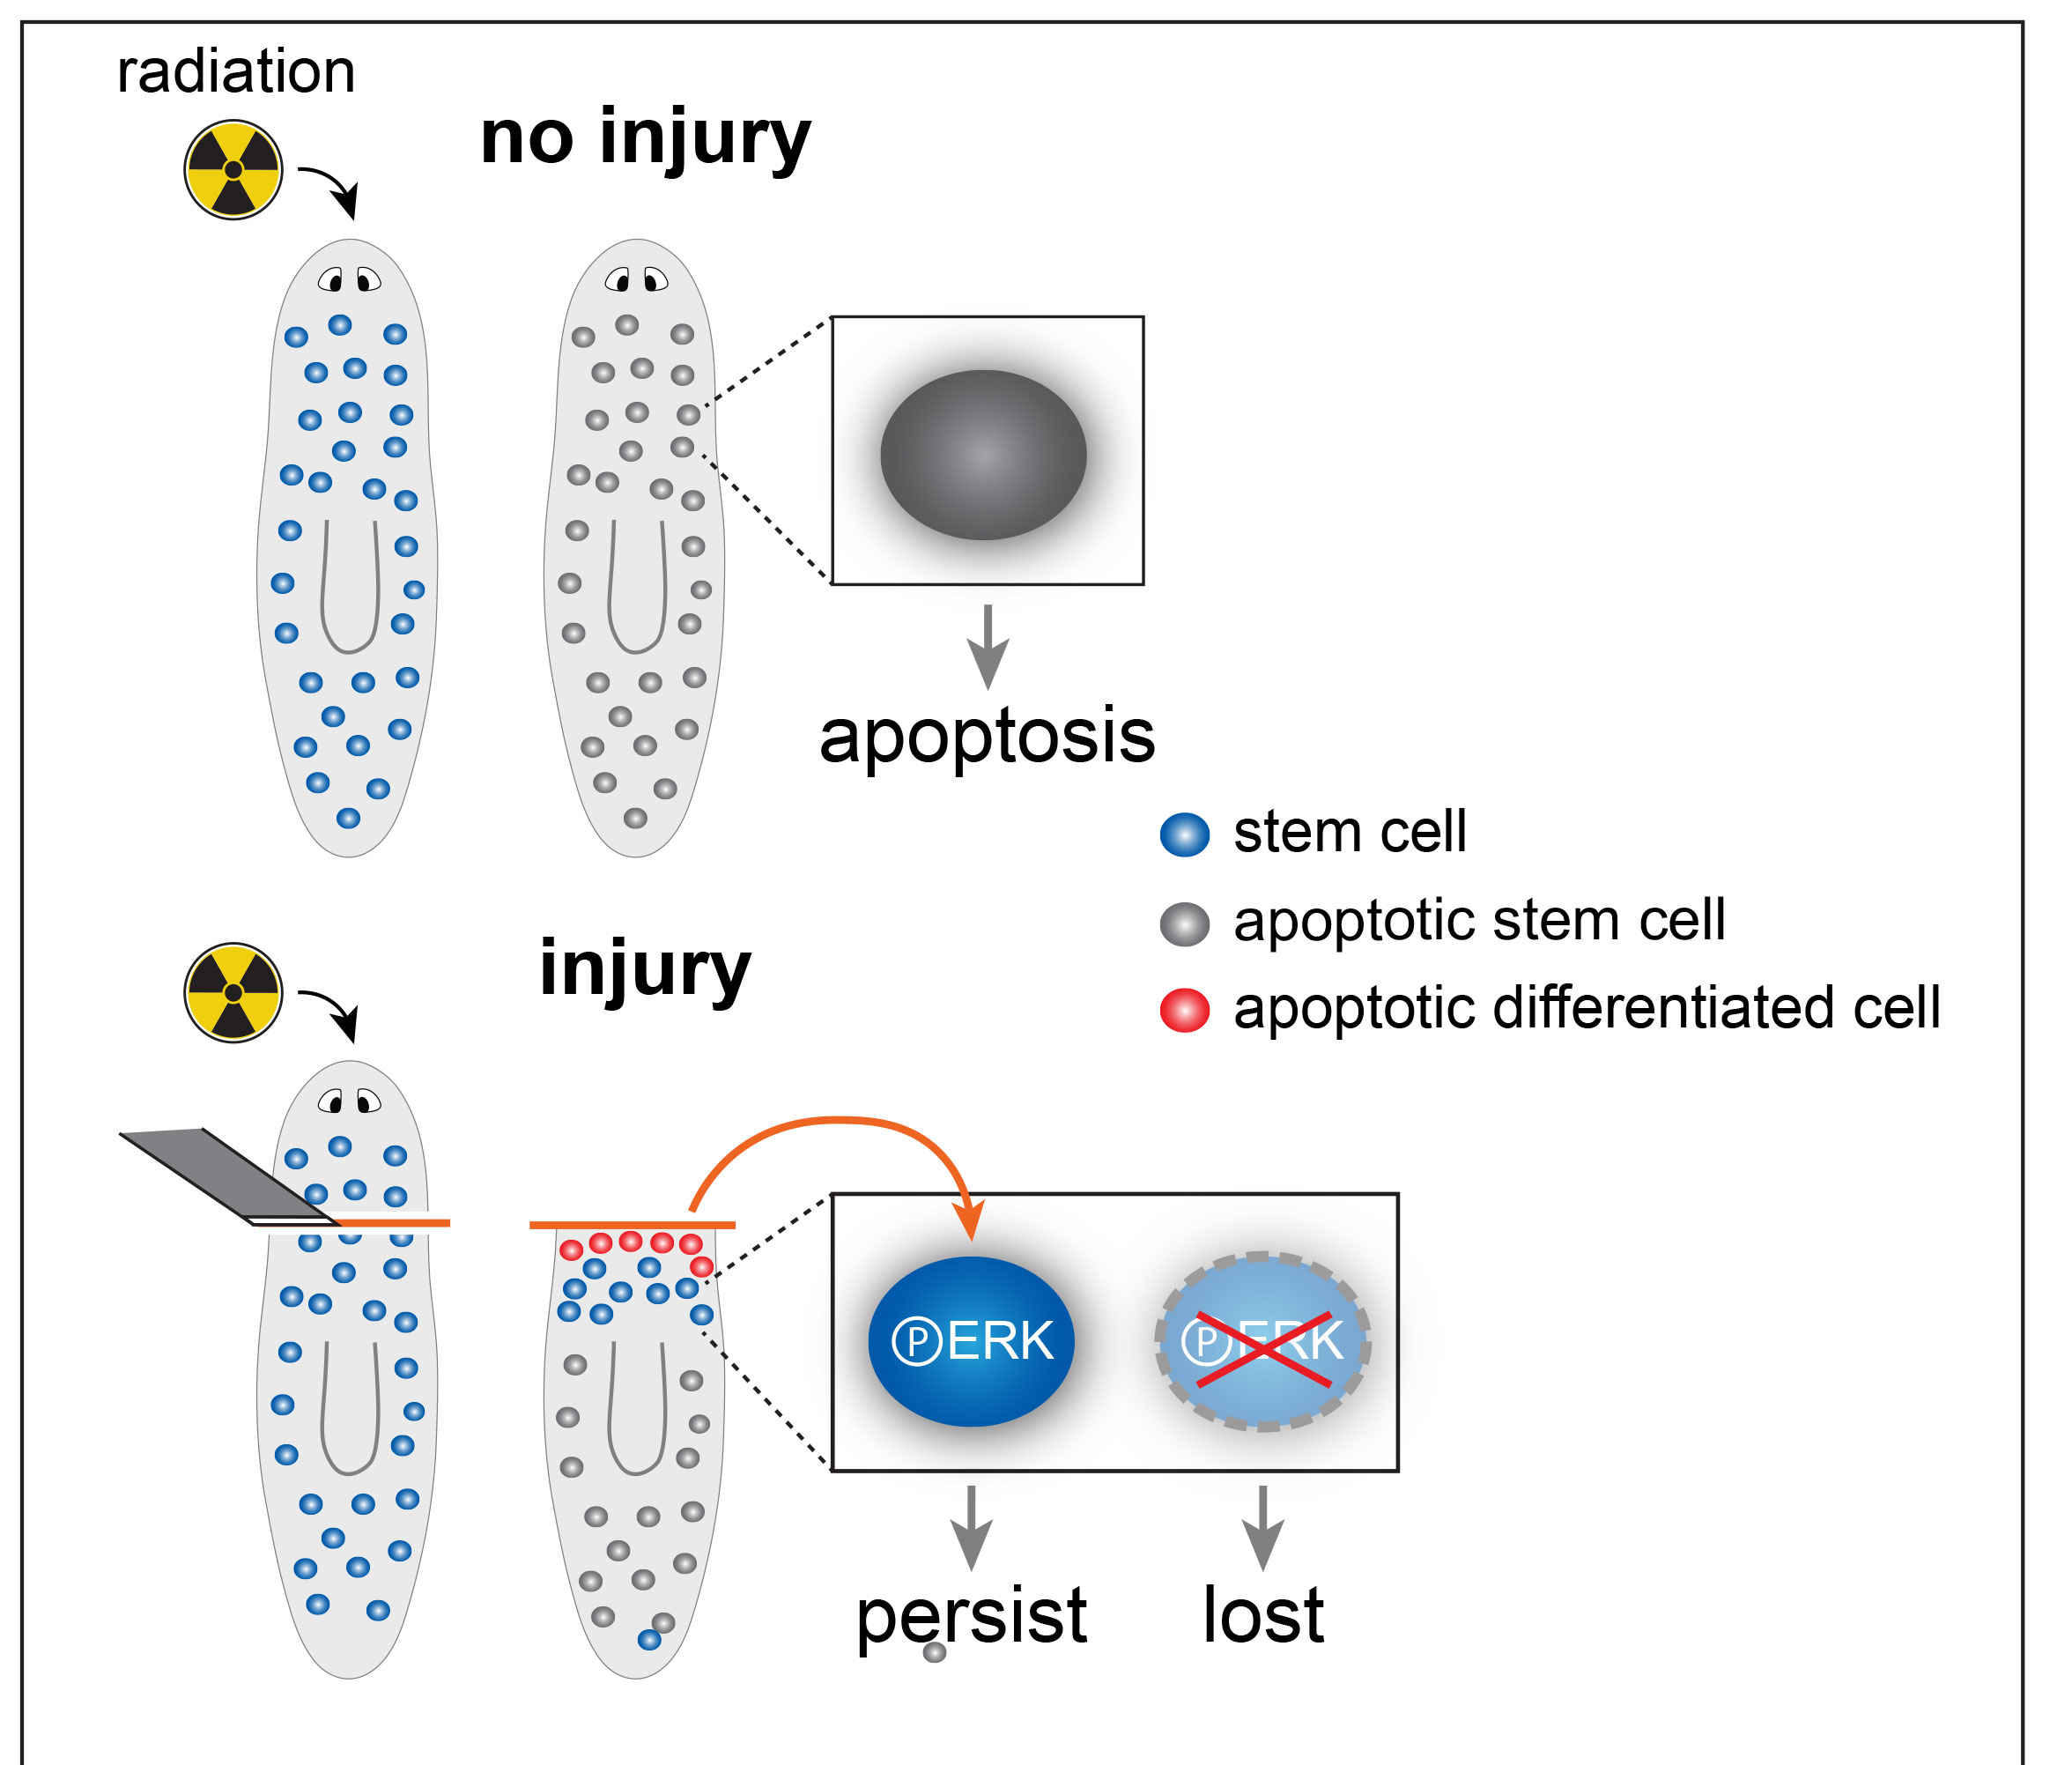 Planarians that received radiation but no injury saw stem cell death, or apoptosis, at a predicted rate, whereas ones with injury saw stem cells persist at the site of injury